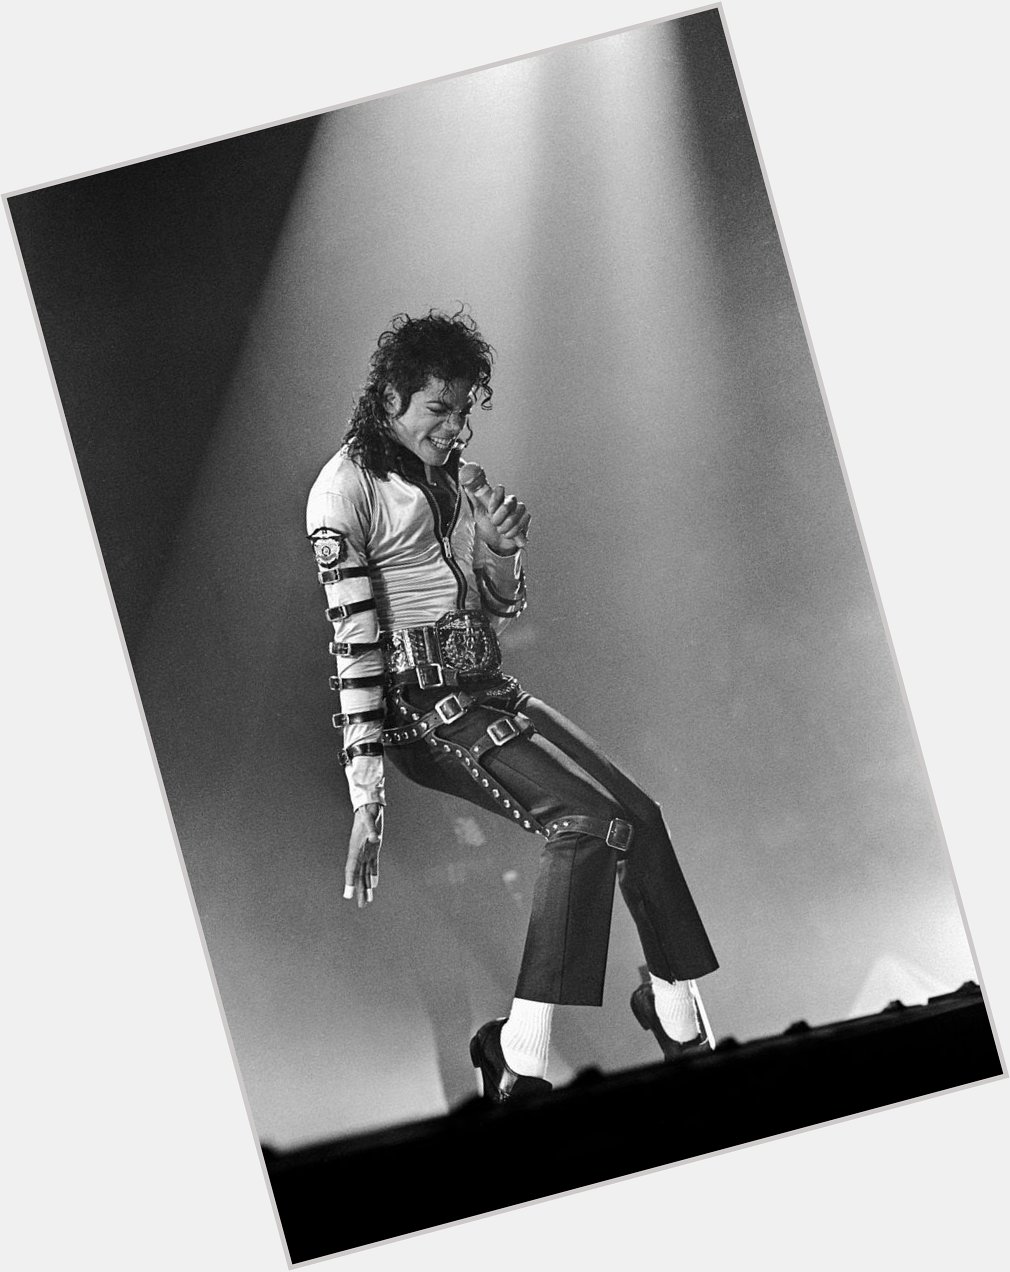 Happy Birthday Michael Jackson. Your legacy is unmatched !! King of Music !! 